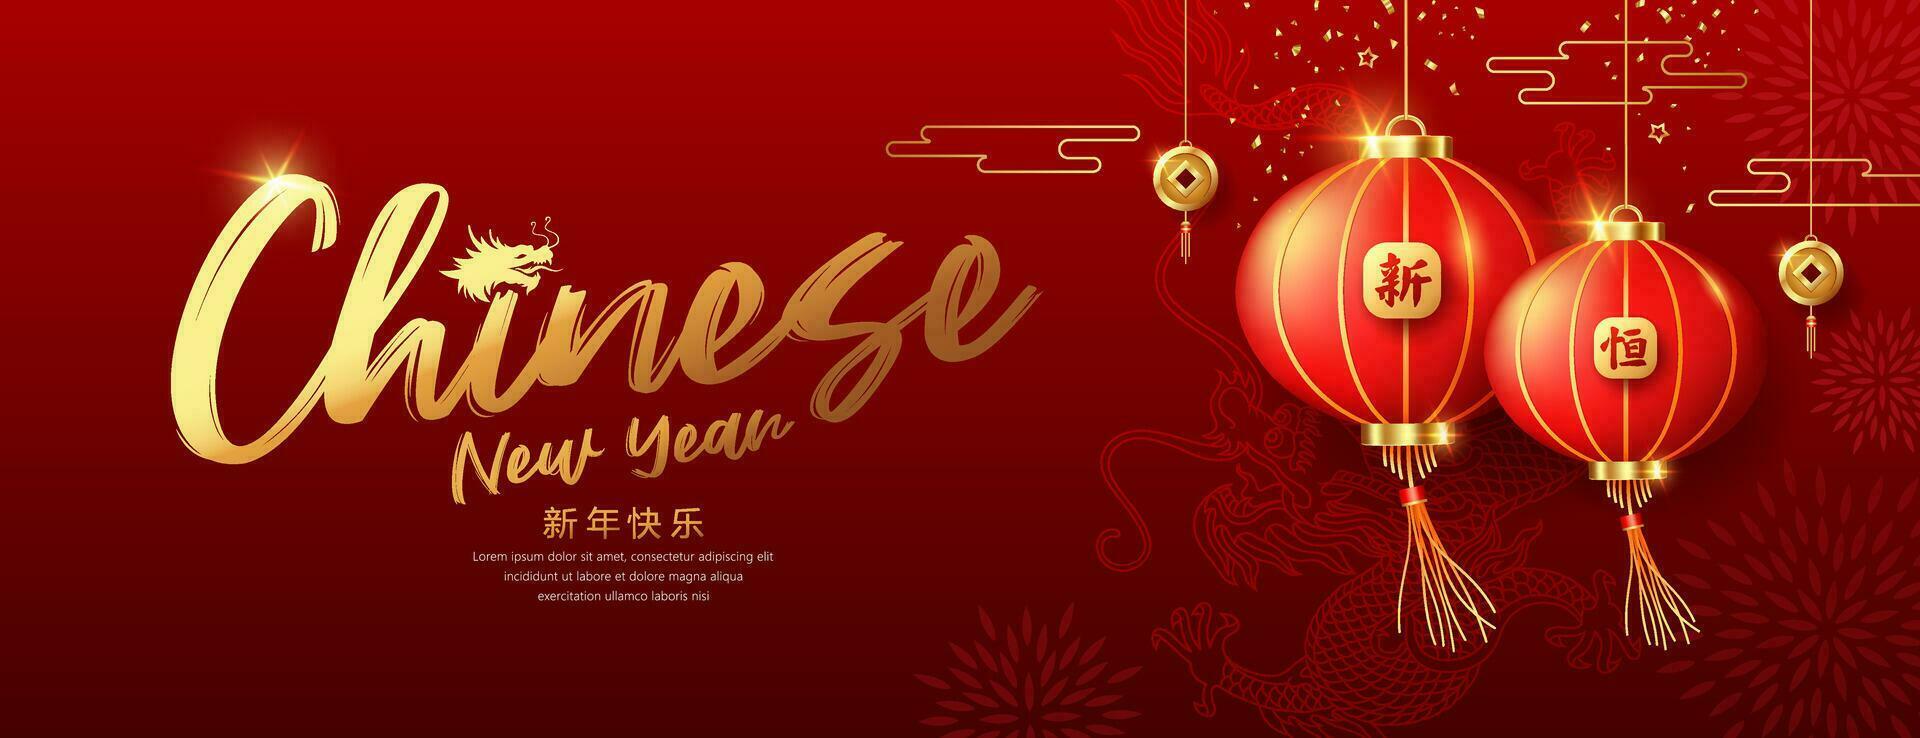 Chinese New Year gold text, chinese lantern and out line dragon, Characters translation Happy new year, banner design on red background, Eps 10 vector illustration